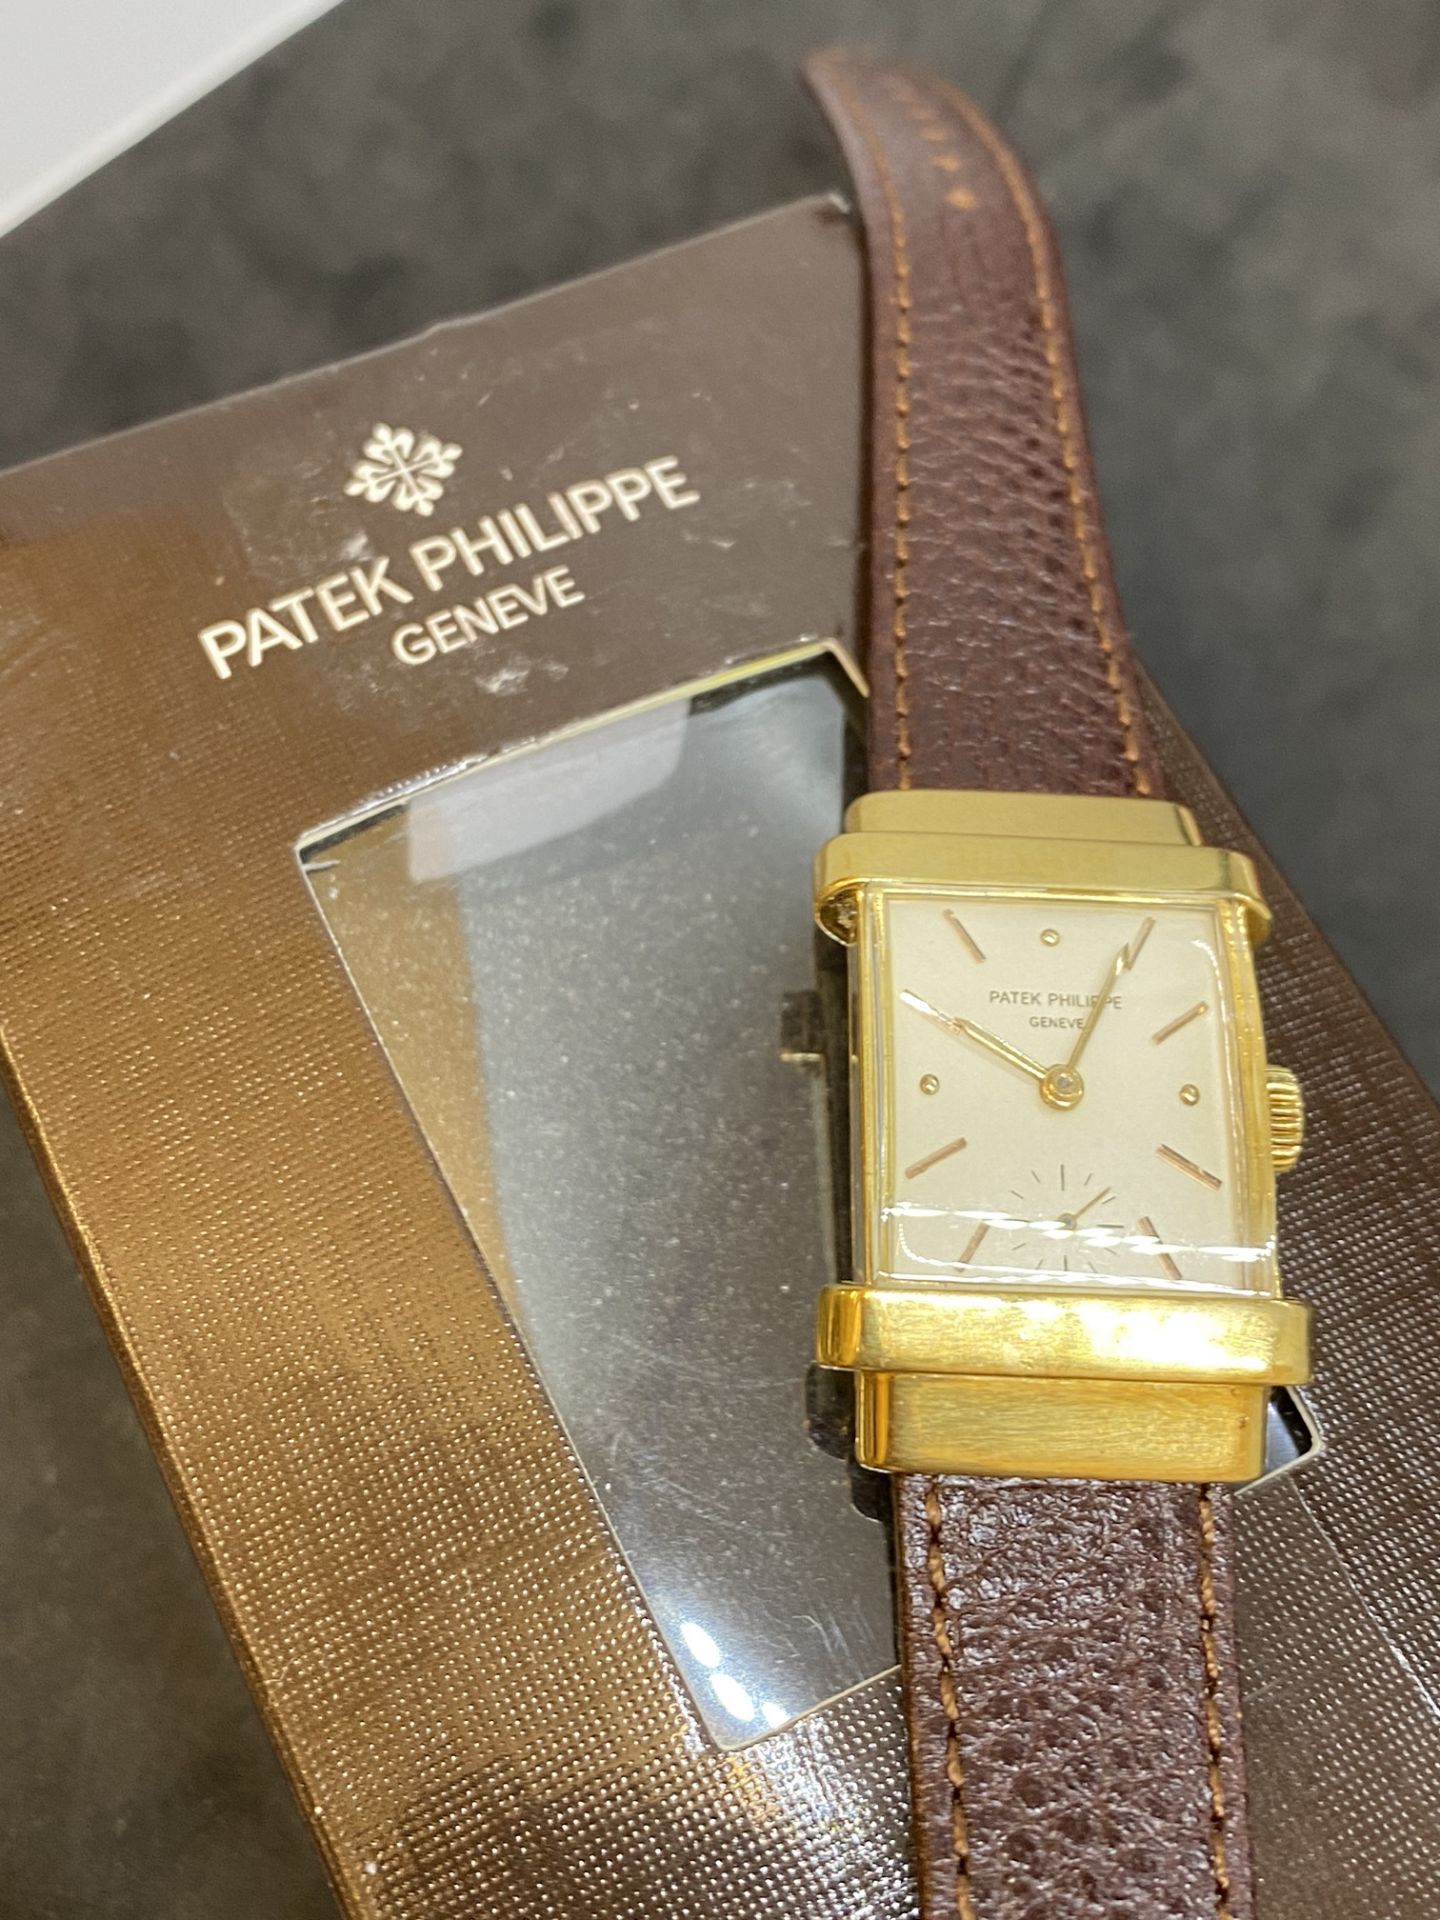 PATEK PHILIPPE 18ct GOLD WATCH WITH PATEK SERVICE BOX - Image 3 of 10